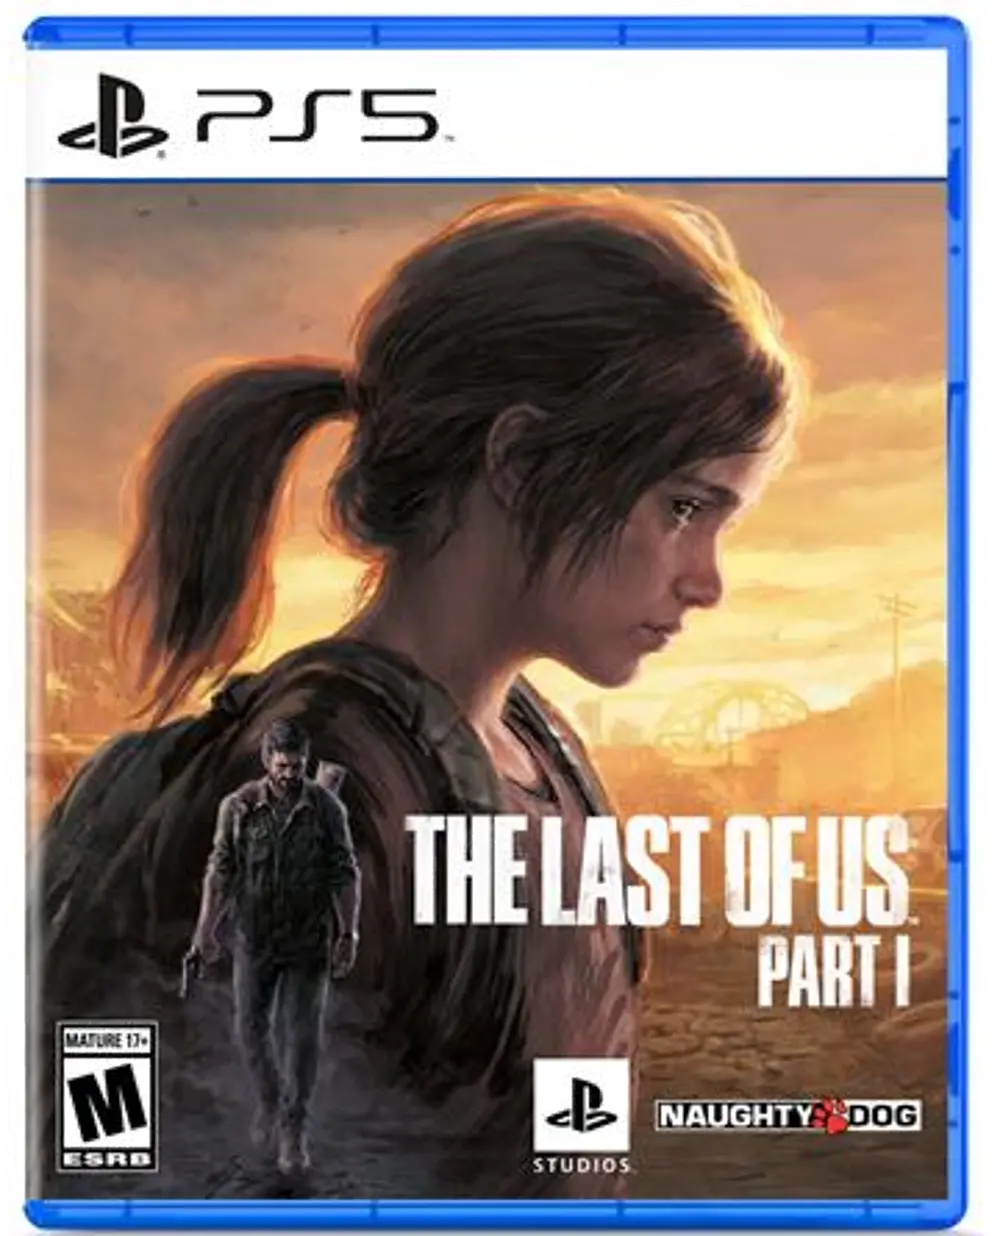 PS5/LAST_OF_US_PART1 The Last of Us, Part 1 - PS5-1